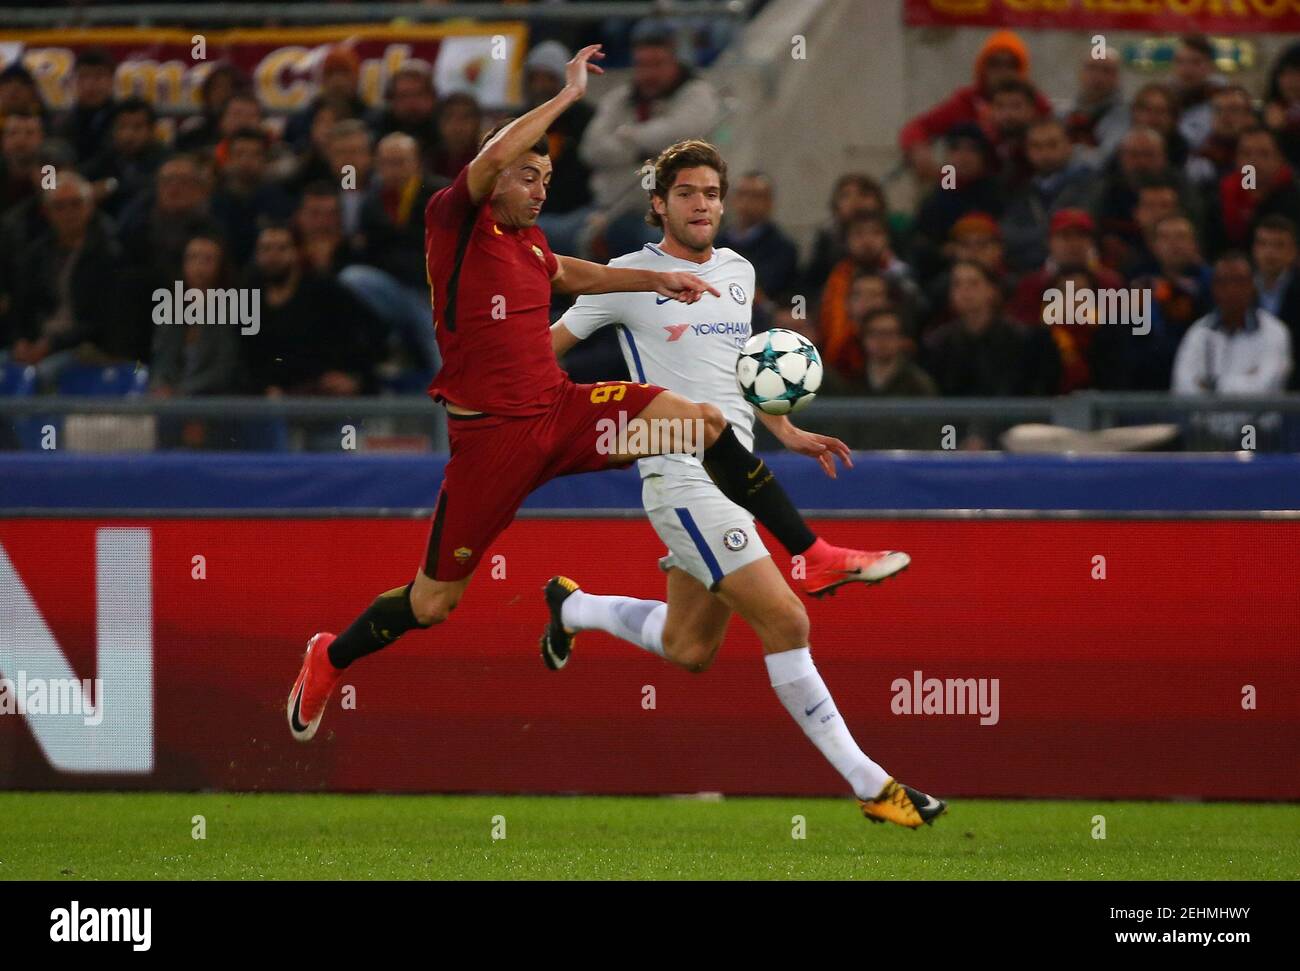 Soccer Football - Champions League - A.S. Roma vs Chelsea - Stadio Olimpico, Rome, Italy - October 31, 2017   AS Roma's Stephan El Shaarawy in action with Chelsea's Marcos Alonso    REUTERS/Alessandro Bianchi Stock Photo